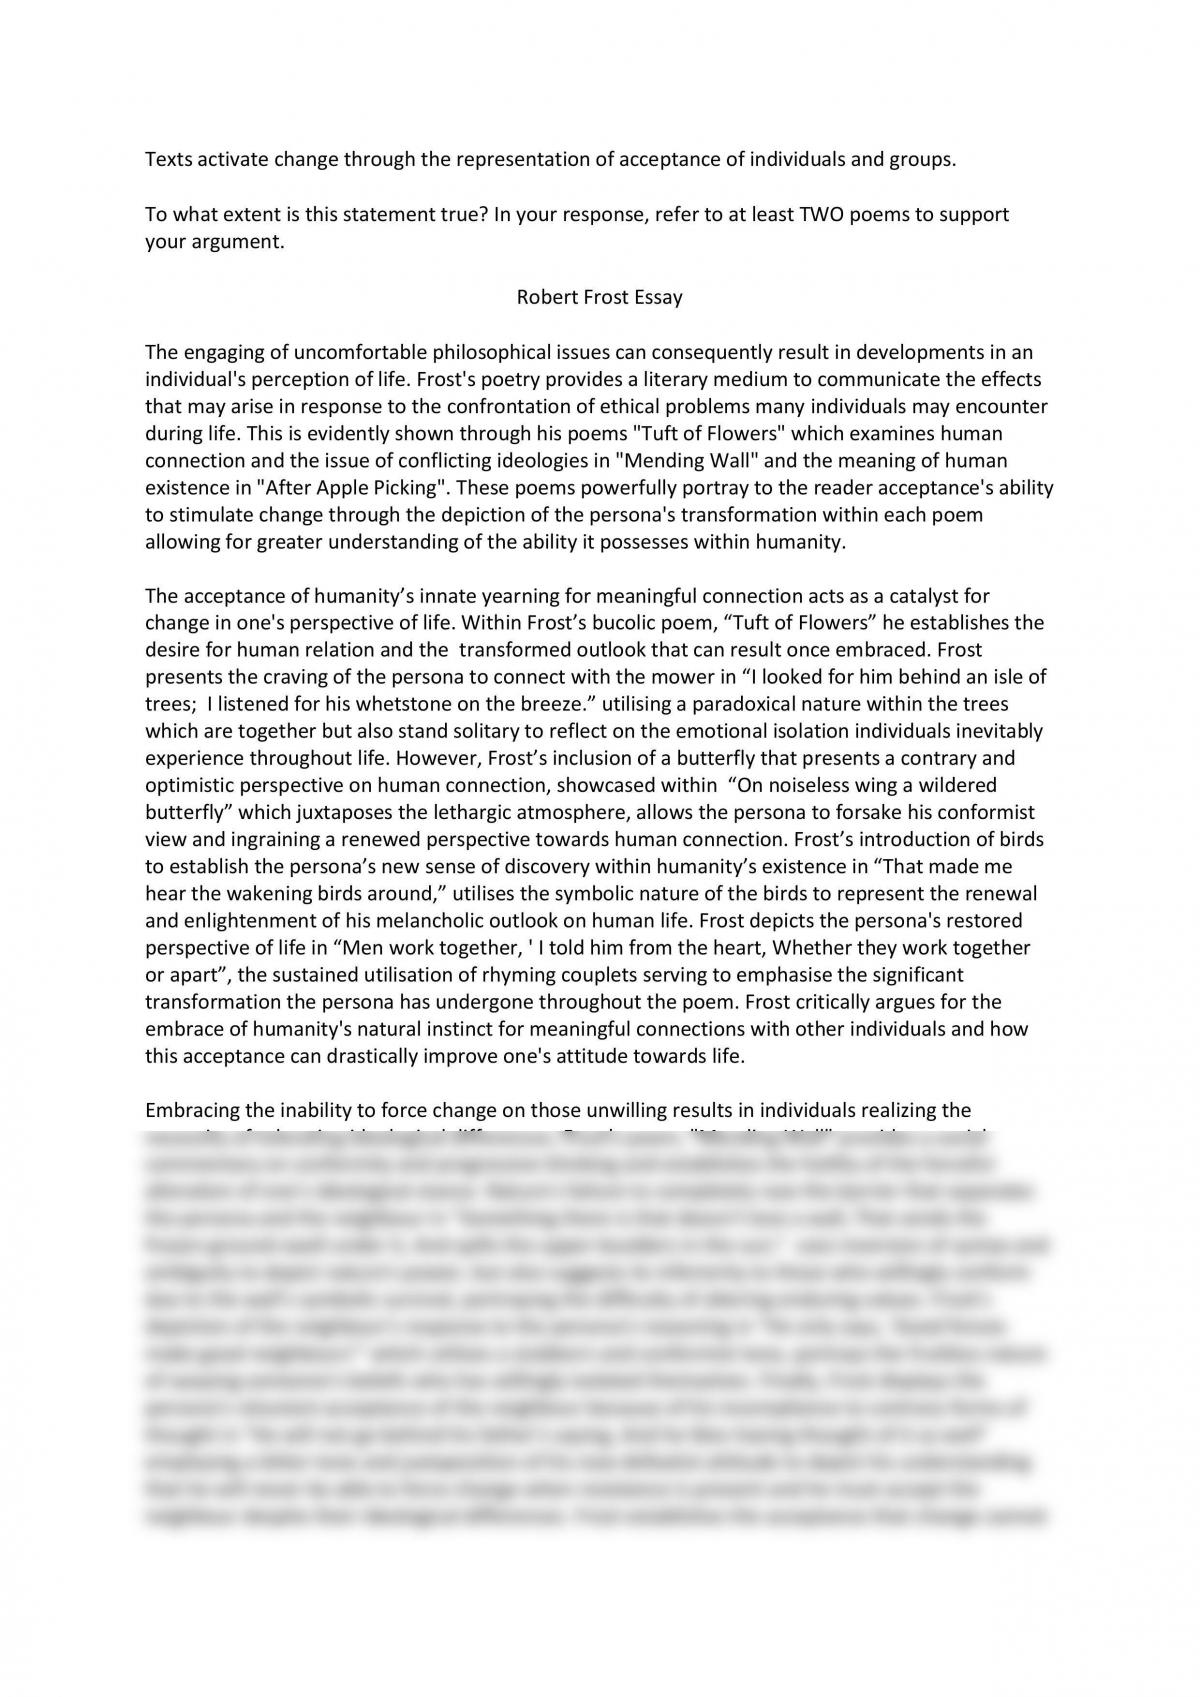 Реферат: Robert Frost Essay Research Paper Through his